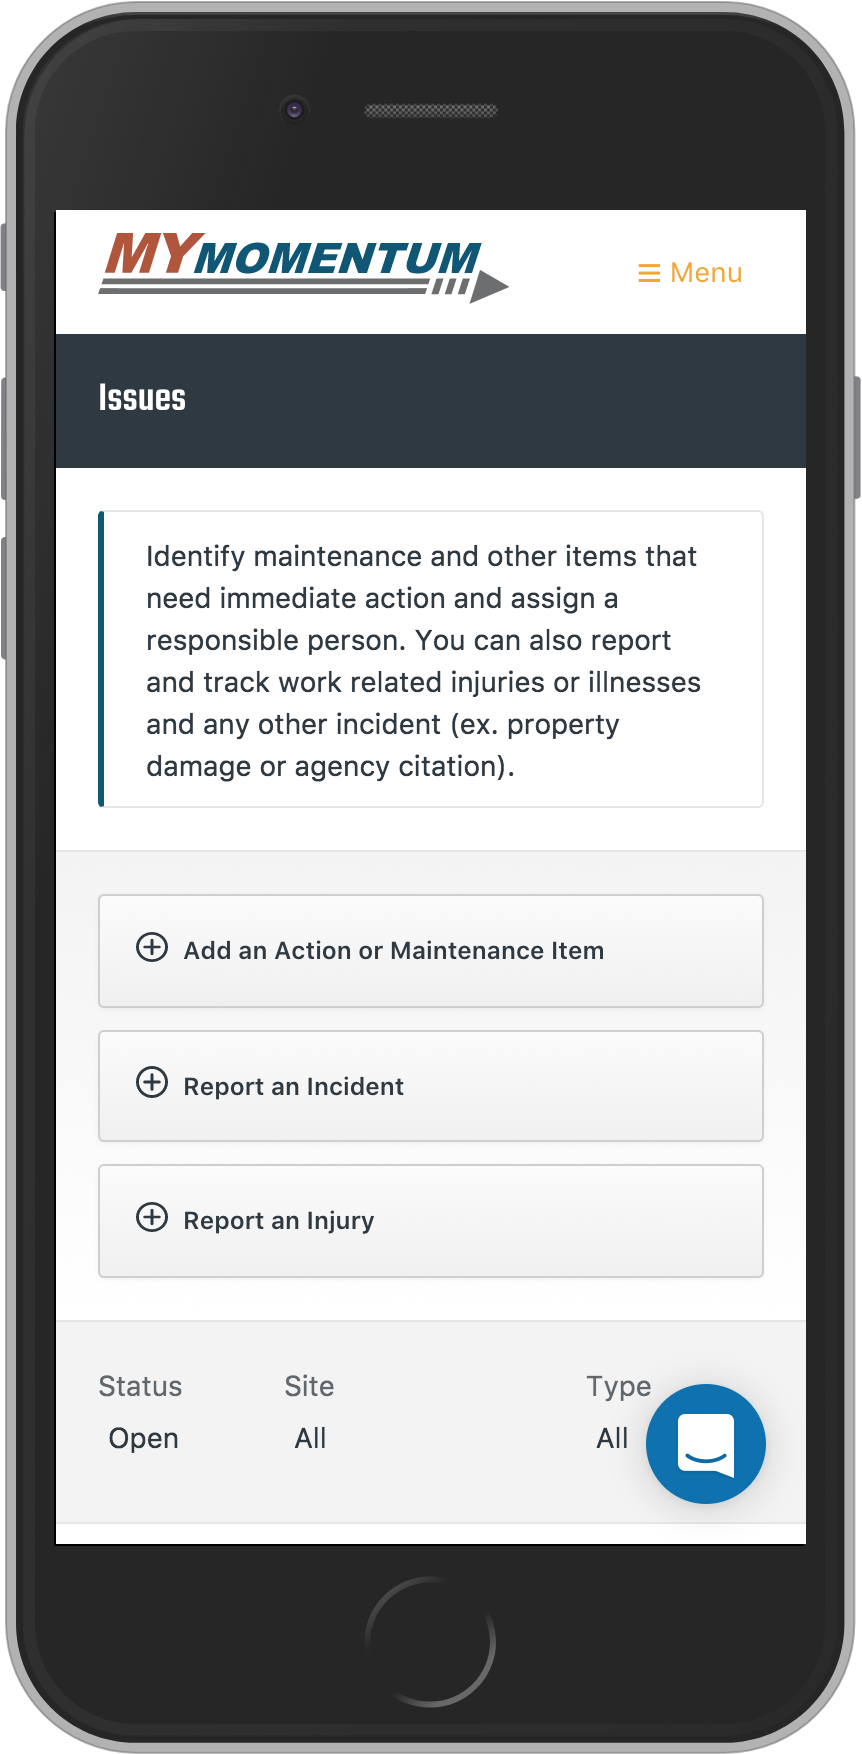 Manage your safety program from any device  - Corrective Action, Assignments, Maintenance Items, Incidents/Accidents and Investigations, Injuries, Inspections, OSHA logs, DOT Drivers,  Regulatory Permits, Program Records, and Job Hazard Assessments.